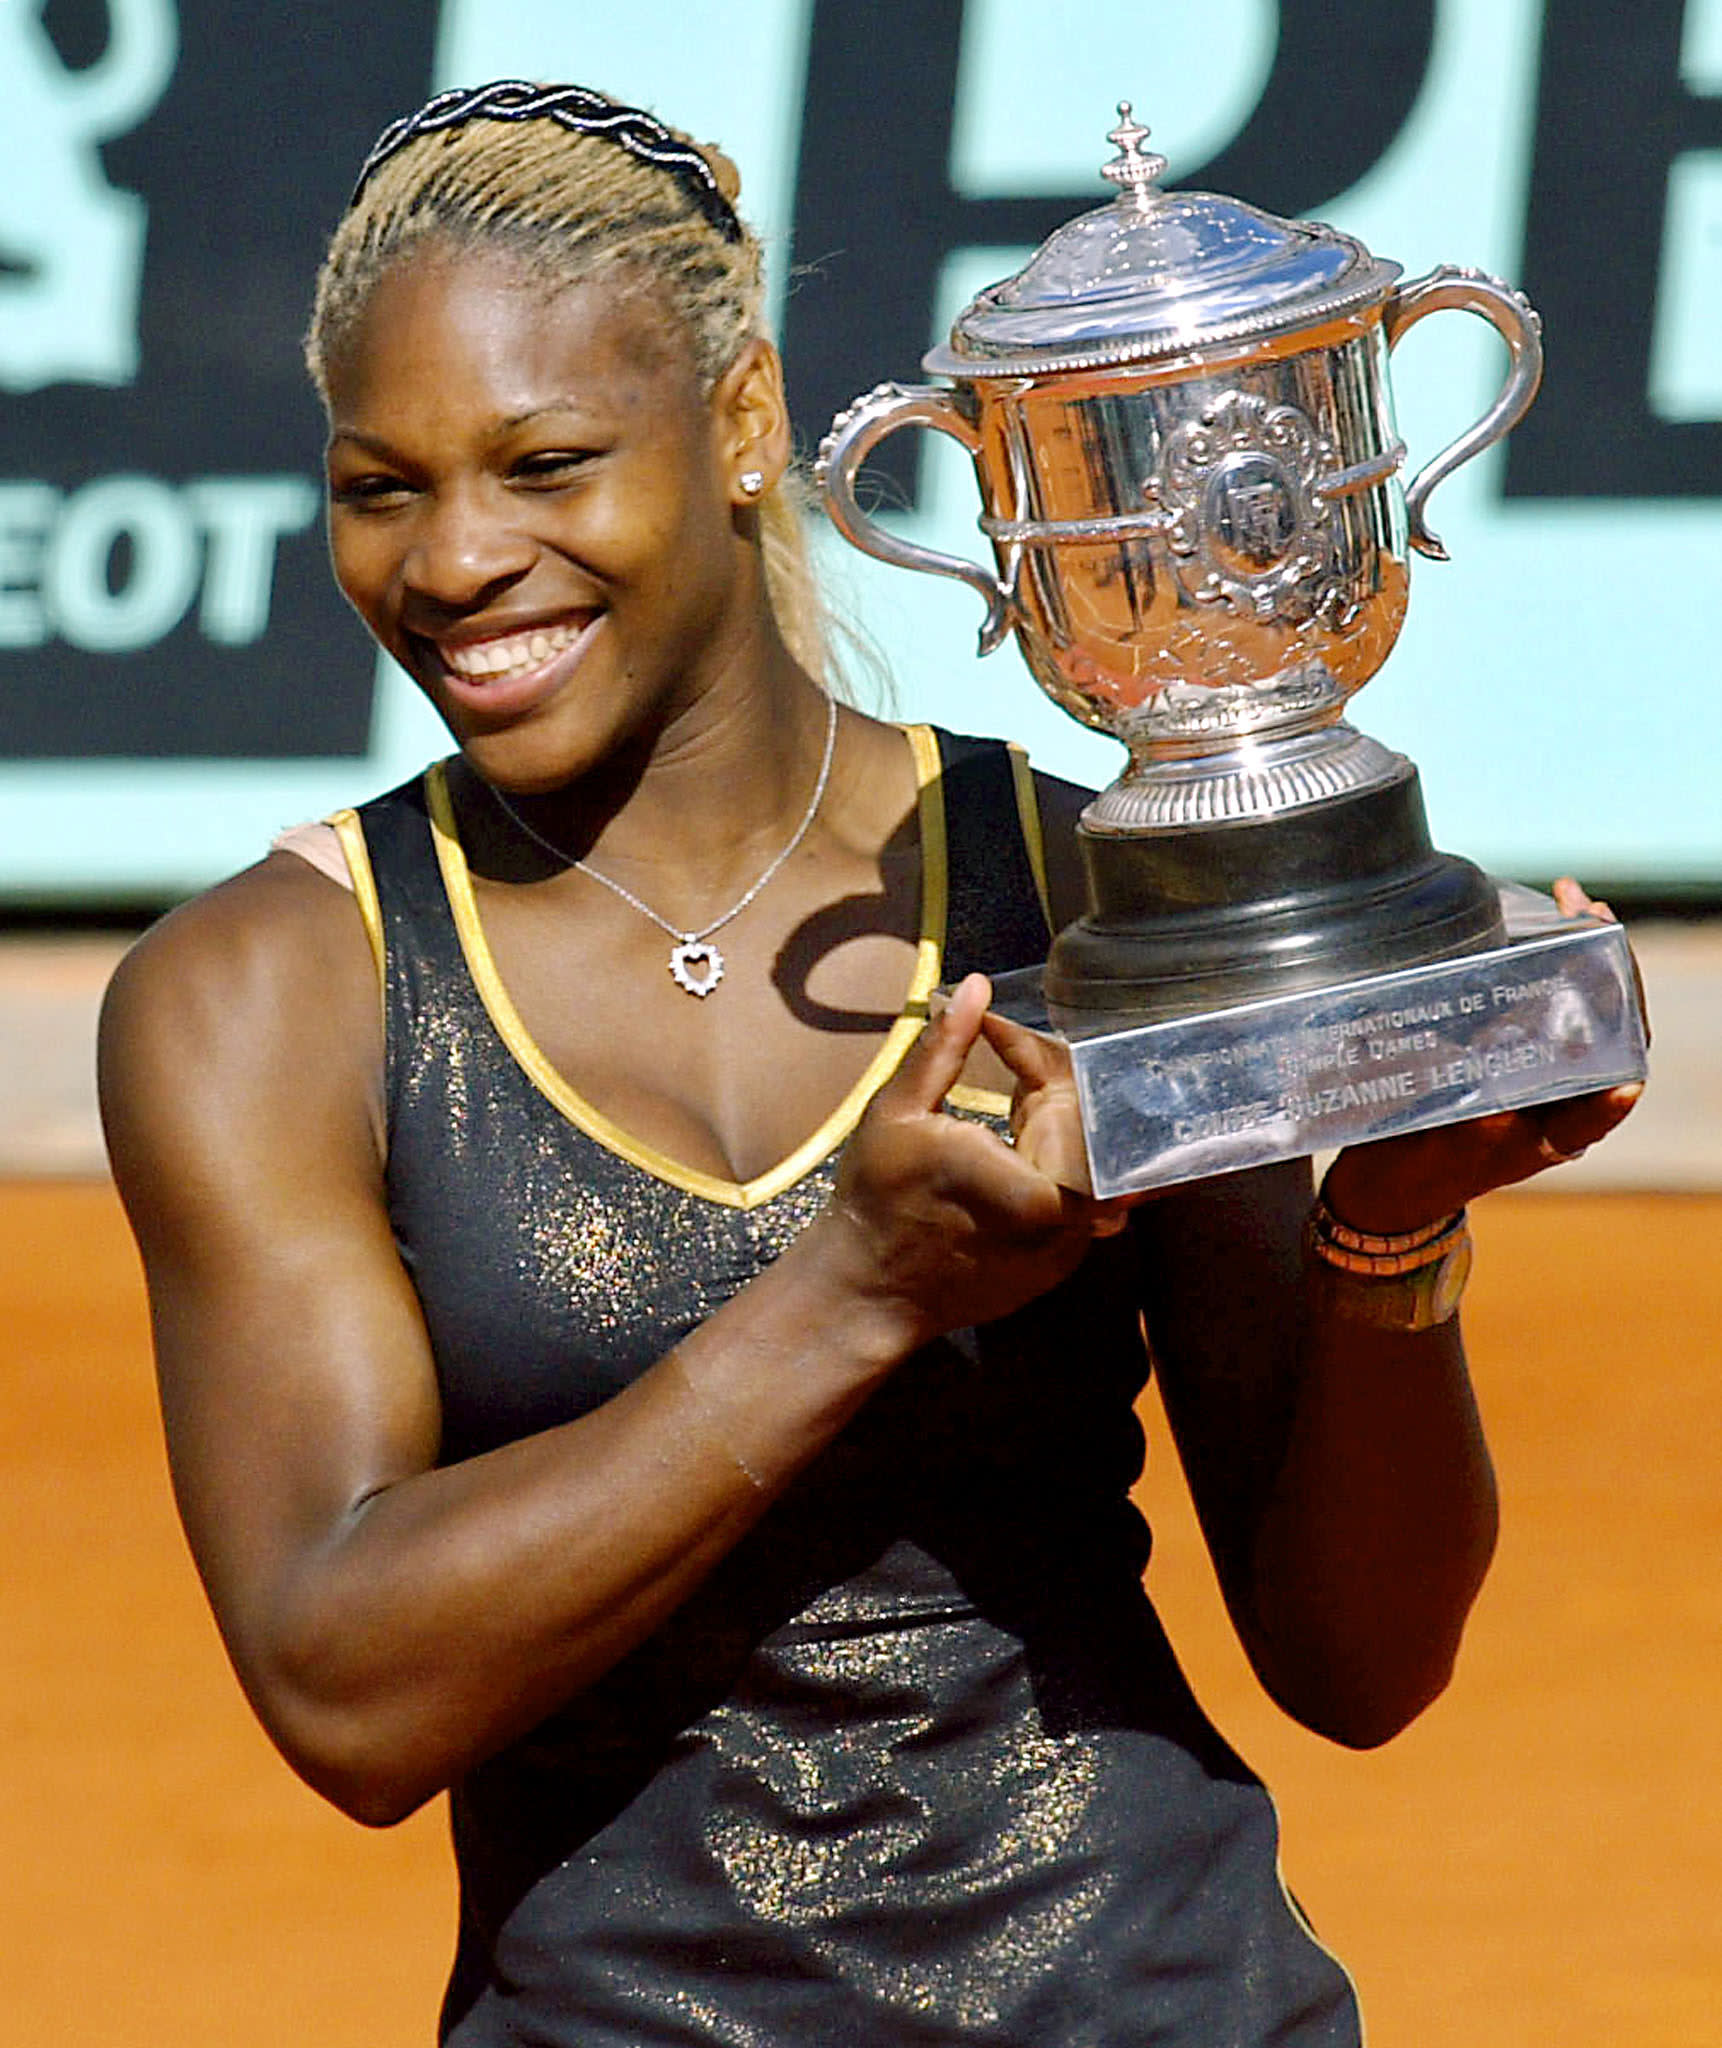 Every Grand Slam title won by Serena Williams